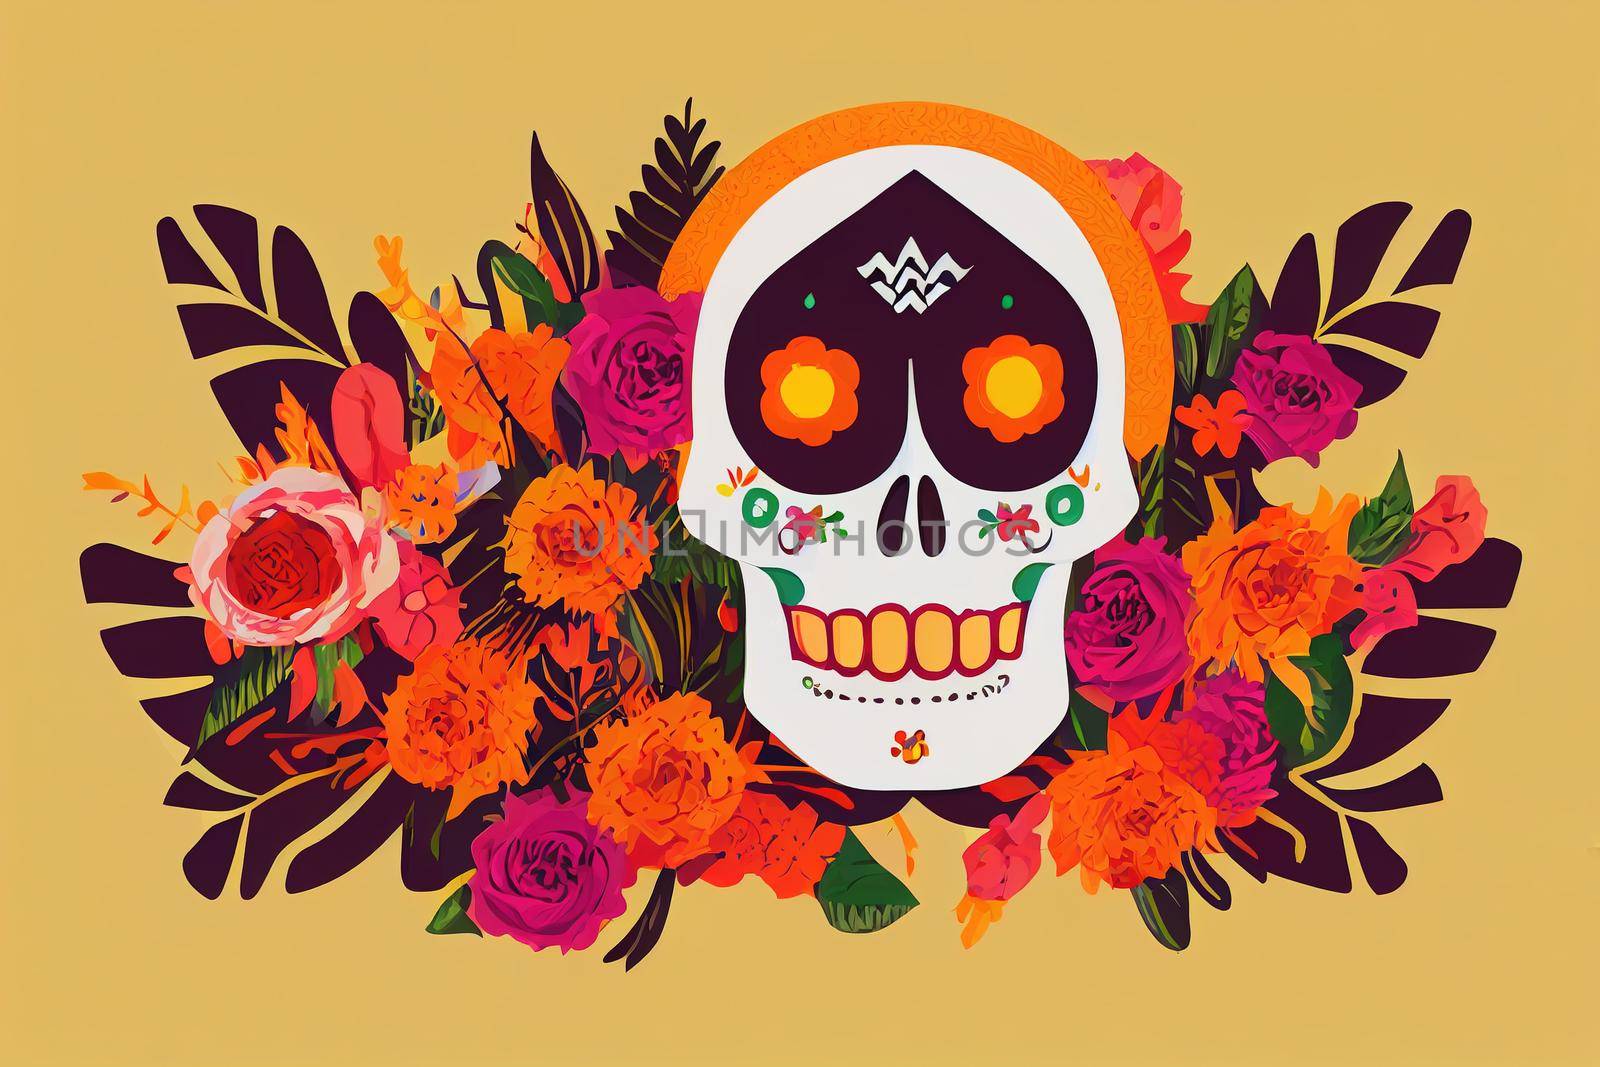 Day Of Dead Traditional Mexican Halloween Dia De Los Muertos Holiday Party Decoration Banner Invitation Flat Illustration 2d style, illustration, design v1